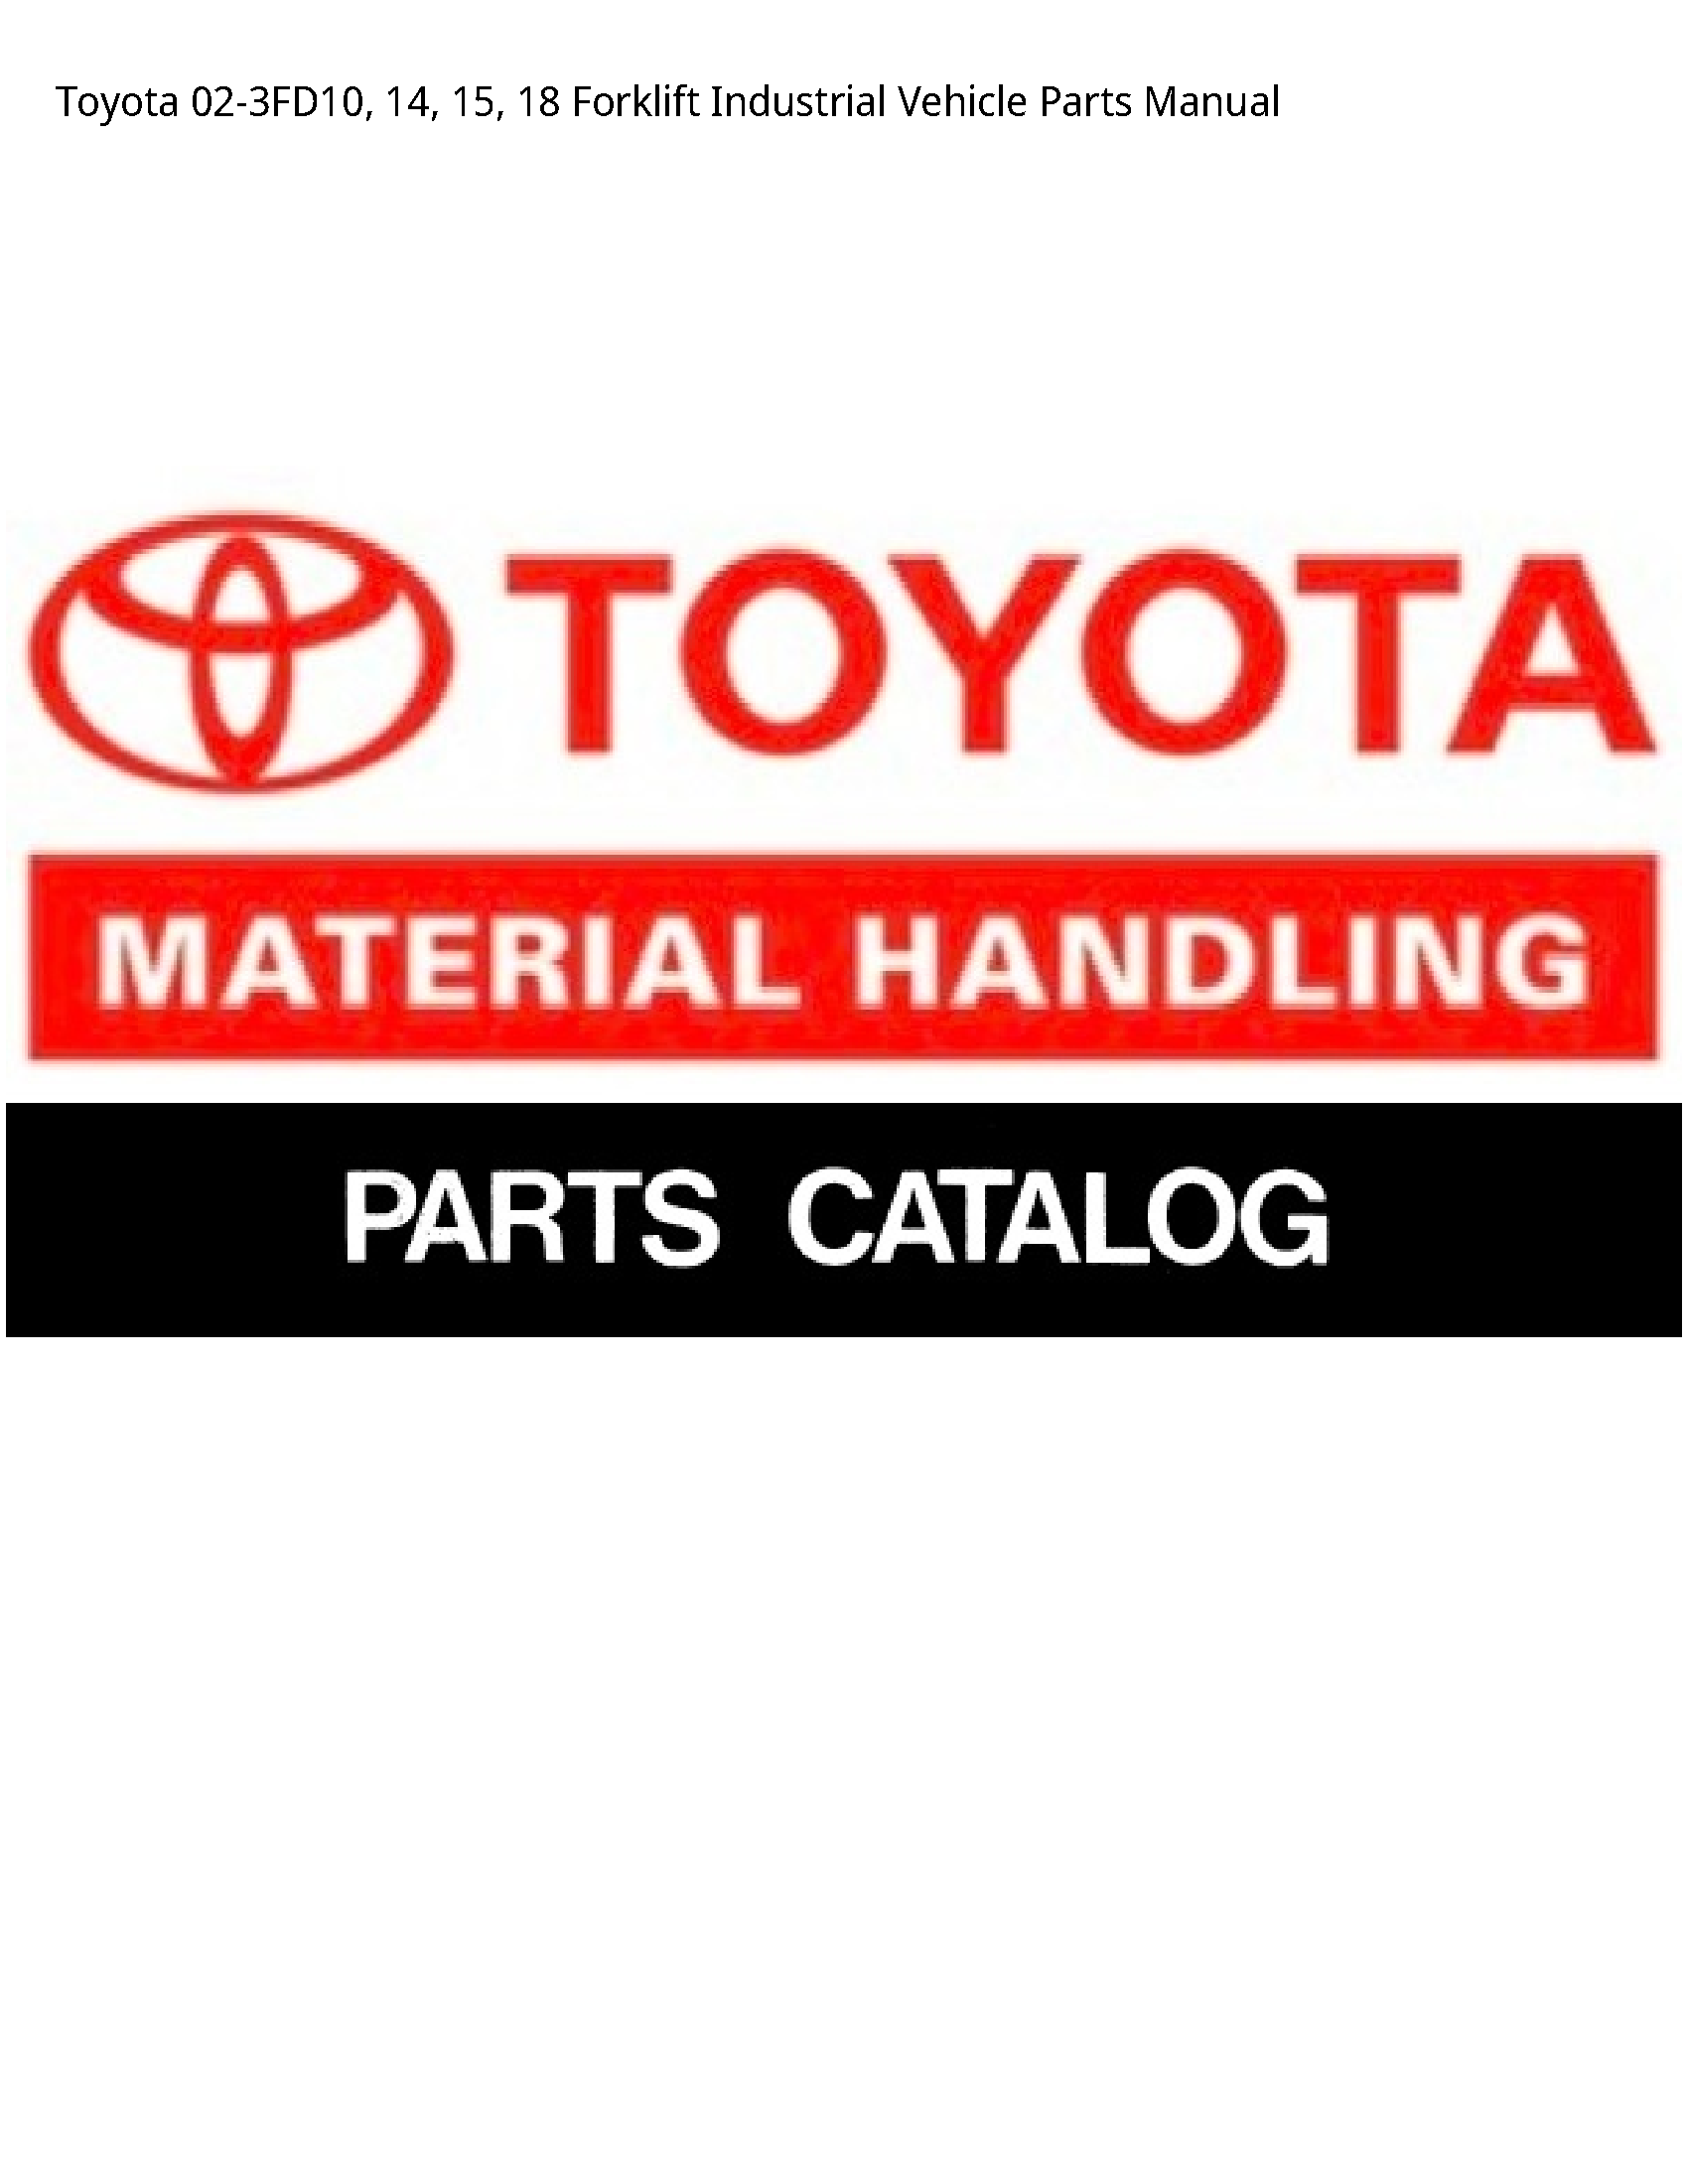 Toyota 02-3FD10 Forklift Industrial Vehicle Parts manual